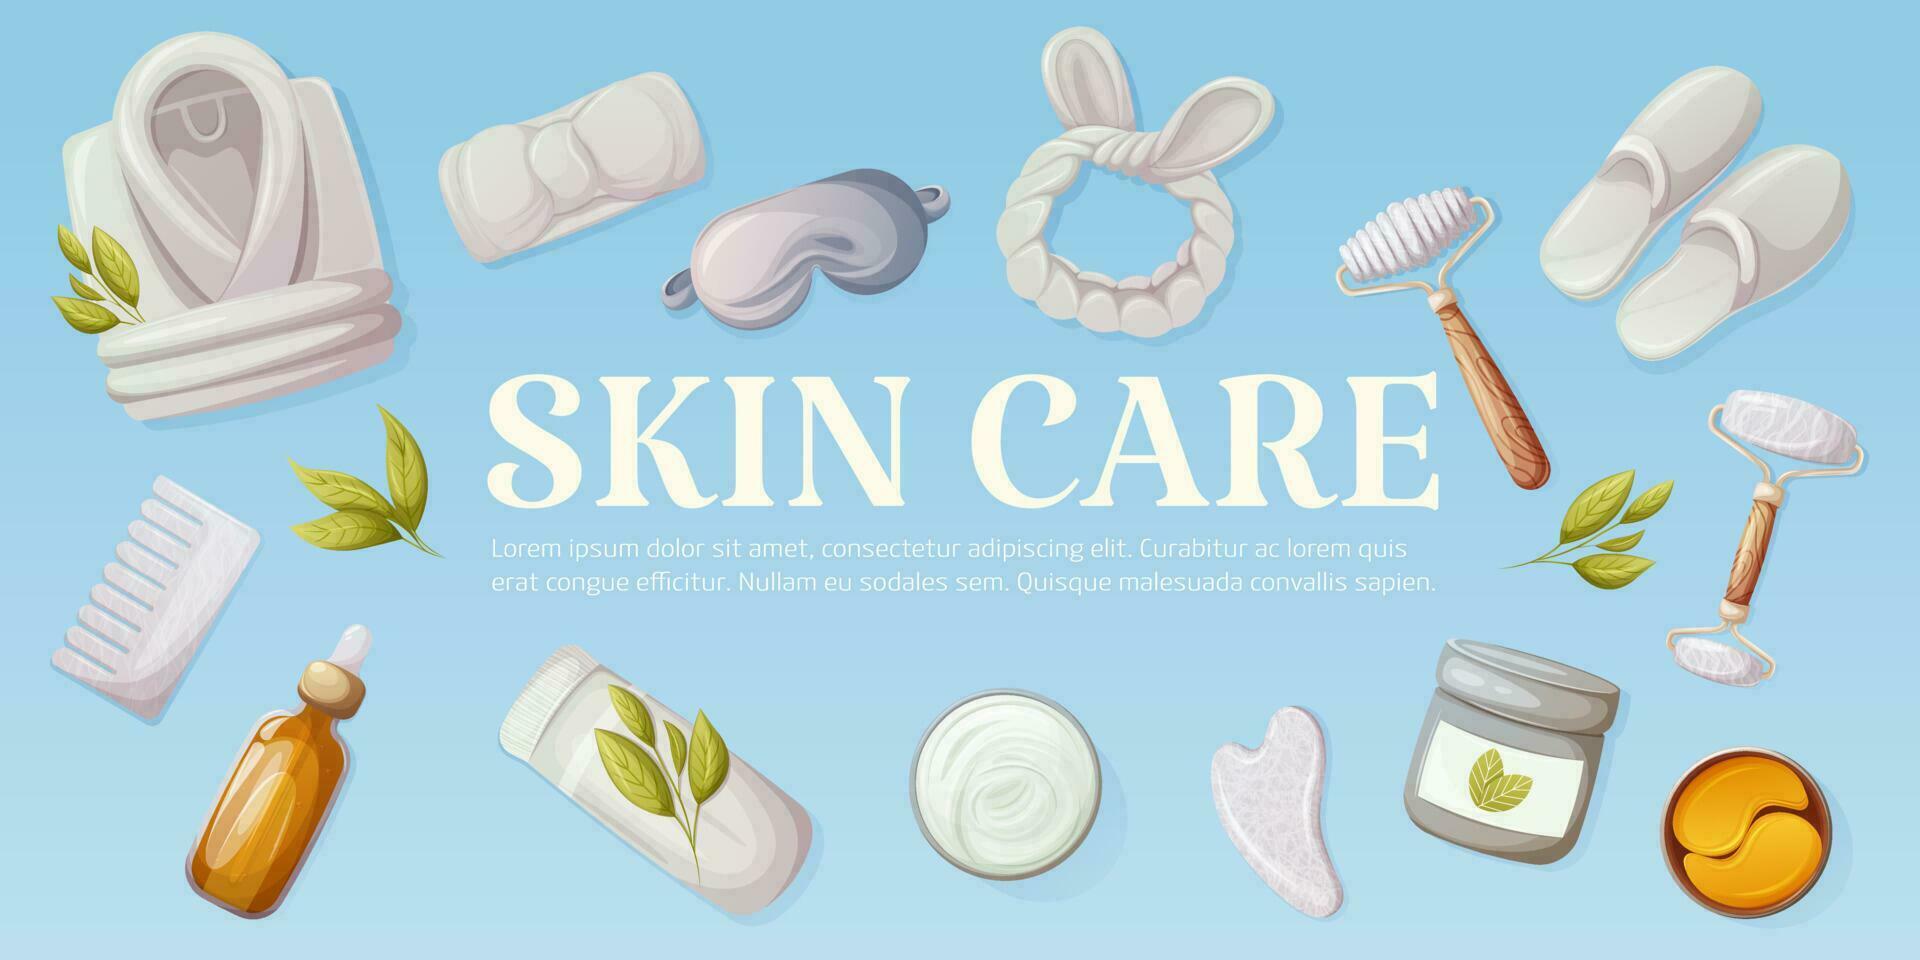 Items for self-care. Gua sha tools, oil serum, folded bathrobe, slippers, headband, eye mask and patches, cream. Skin care banner with space for text. Vector illustration